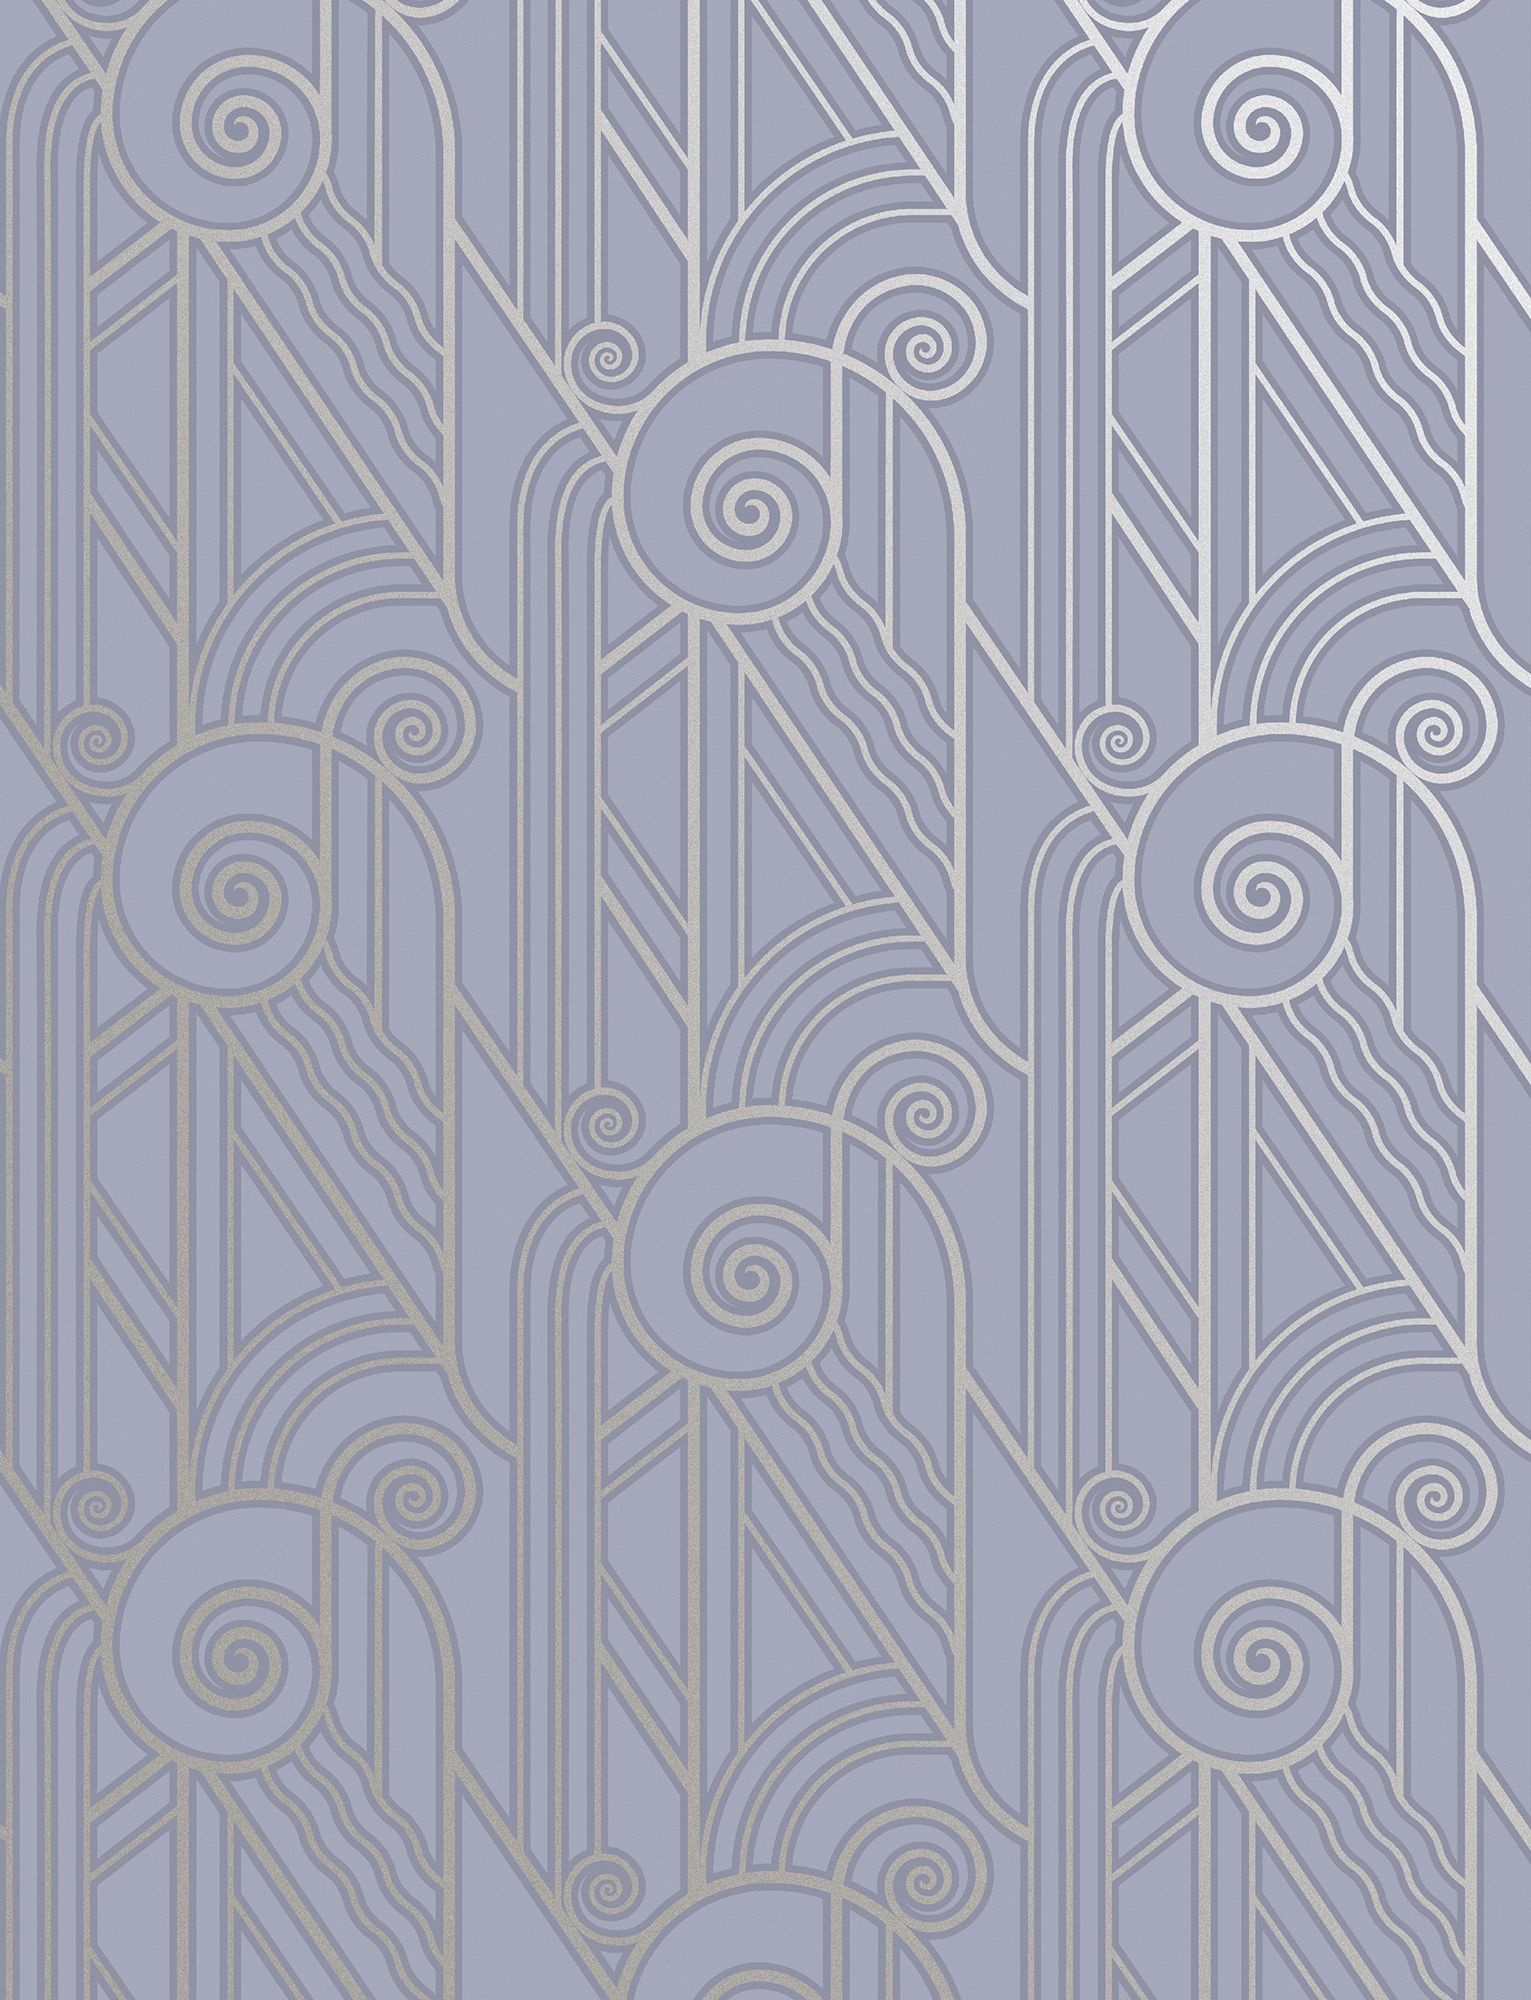 18 Art Deco Wallpaper Ideas - Decorating with 1920s Art Deco Wall Coverings 1540x2000